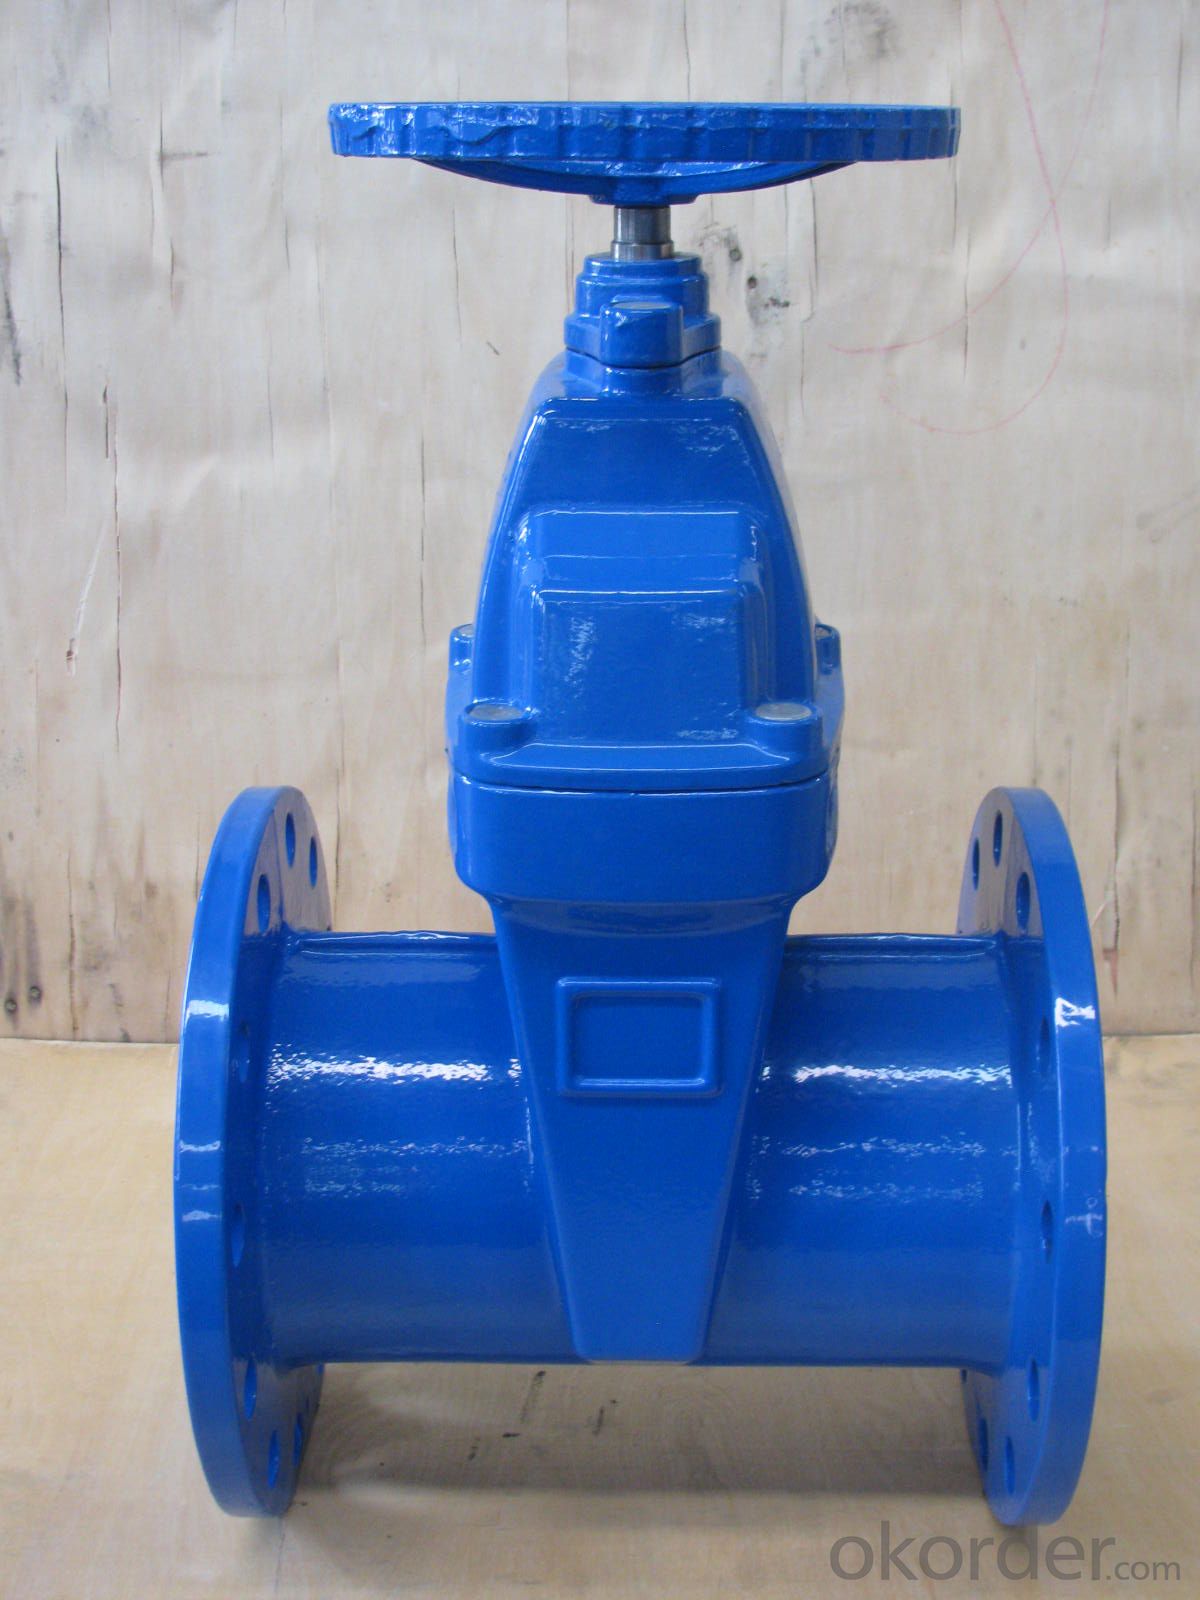 Gate Valve with Price with 50year Old Valve Manufacturer on Sale real